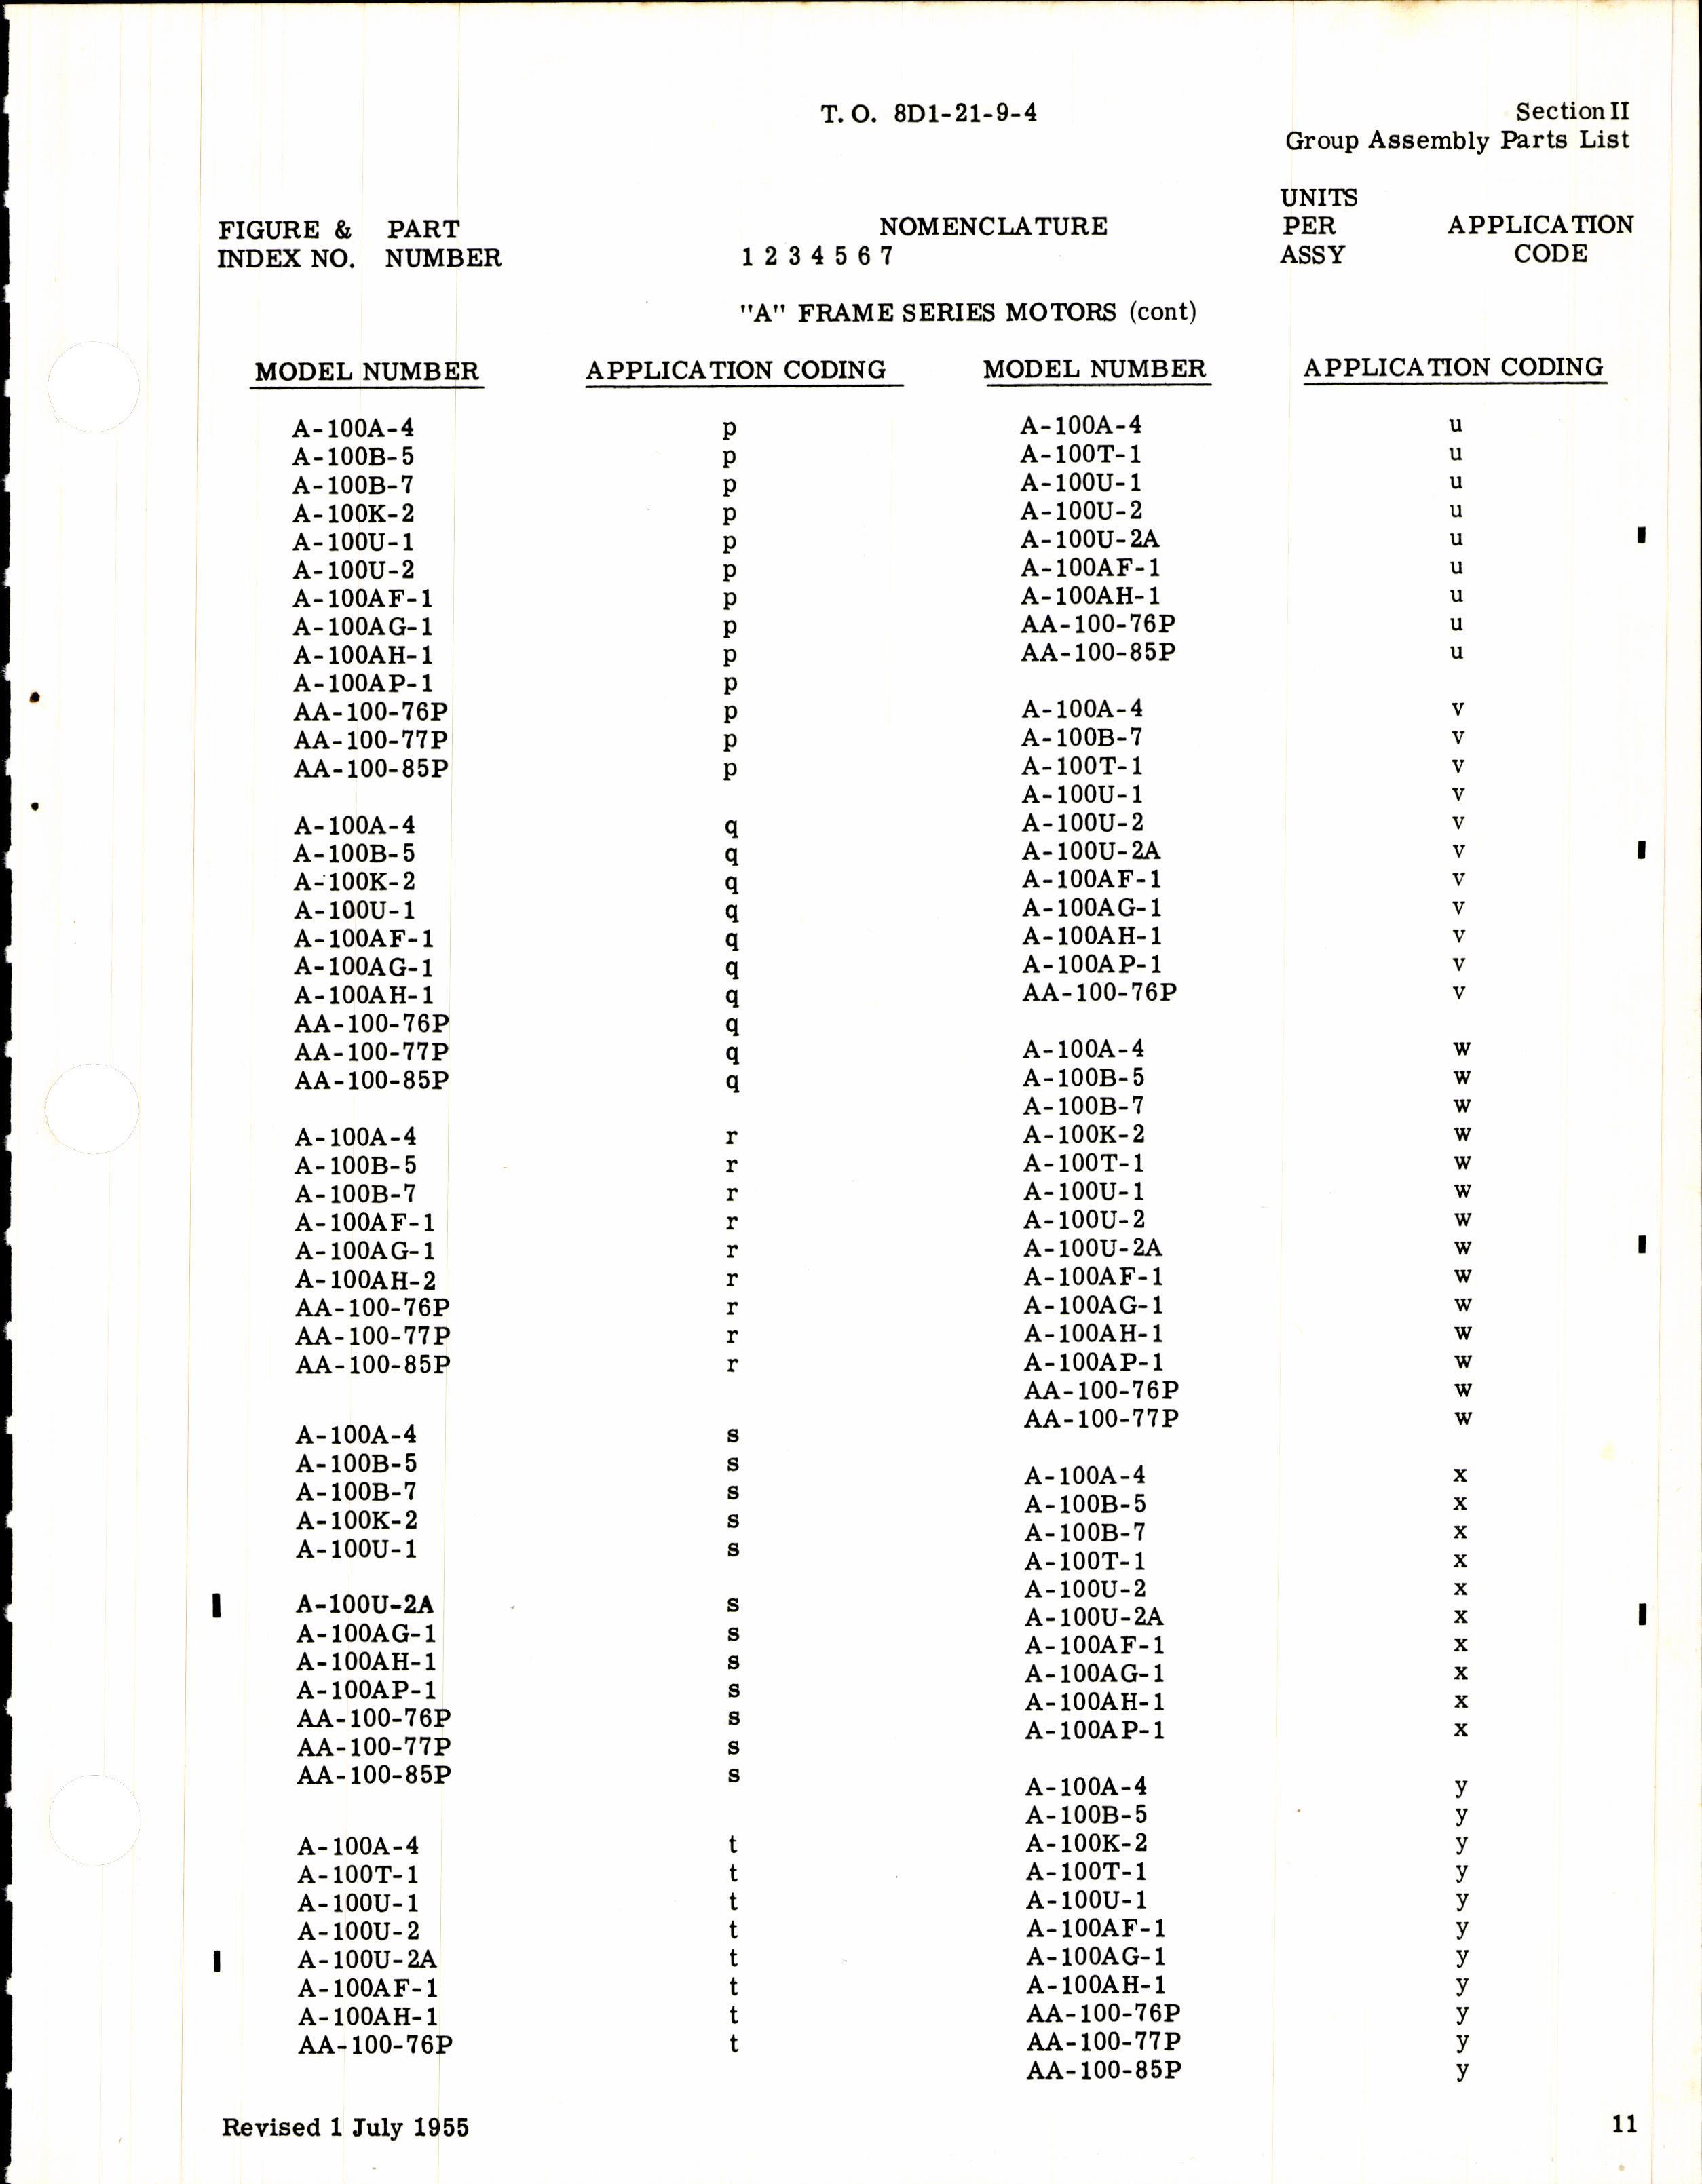 Sample page 7 from AirCorps Library document: Parts Catalog for Lear Control Box Assemblies and Motors